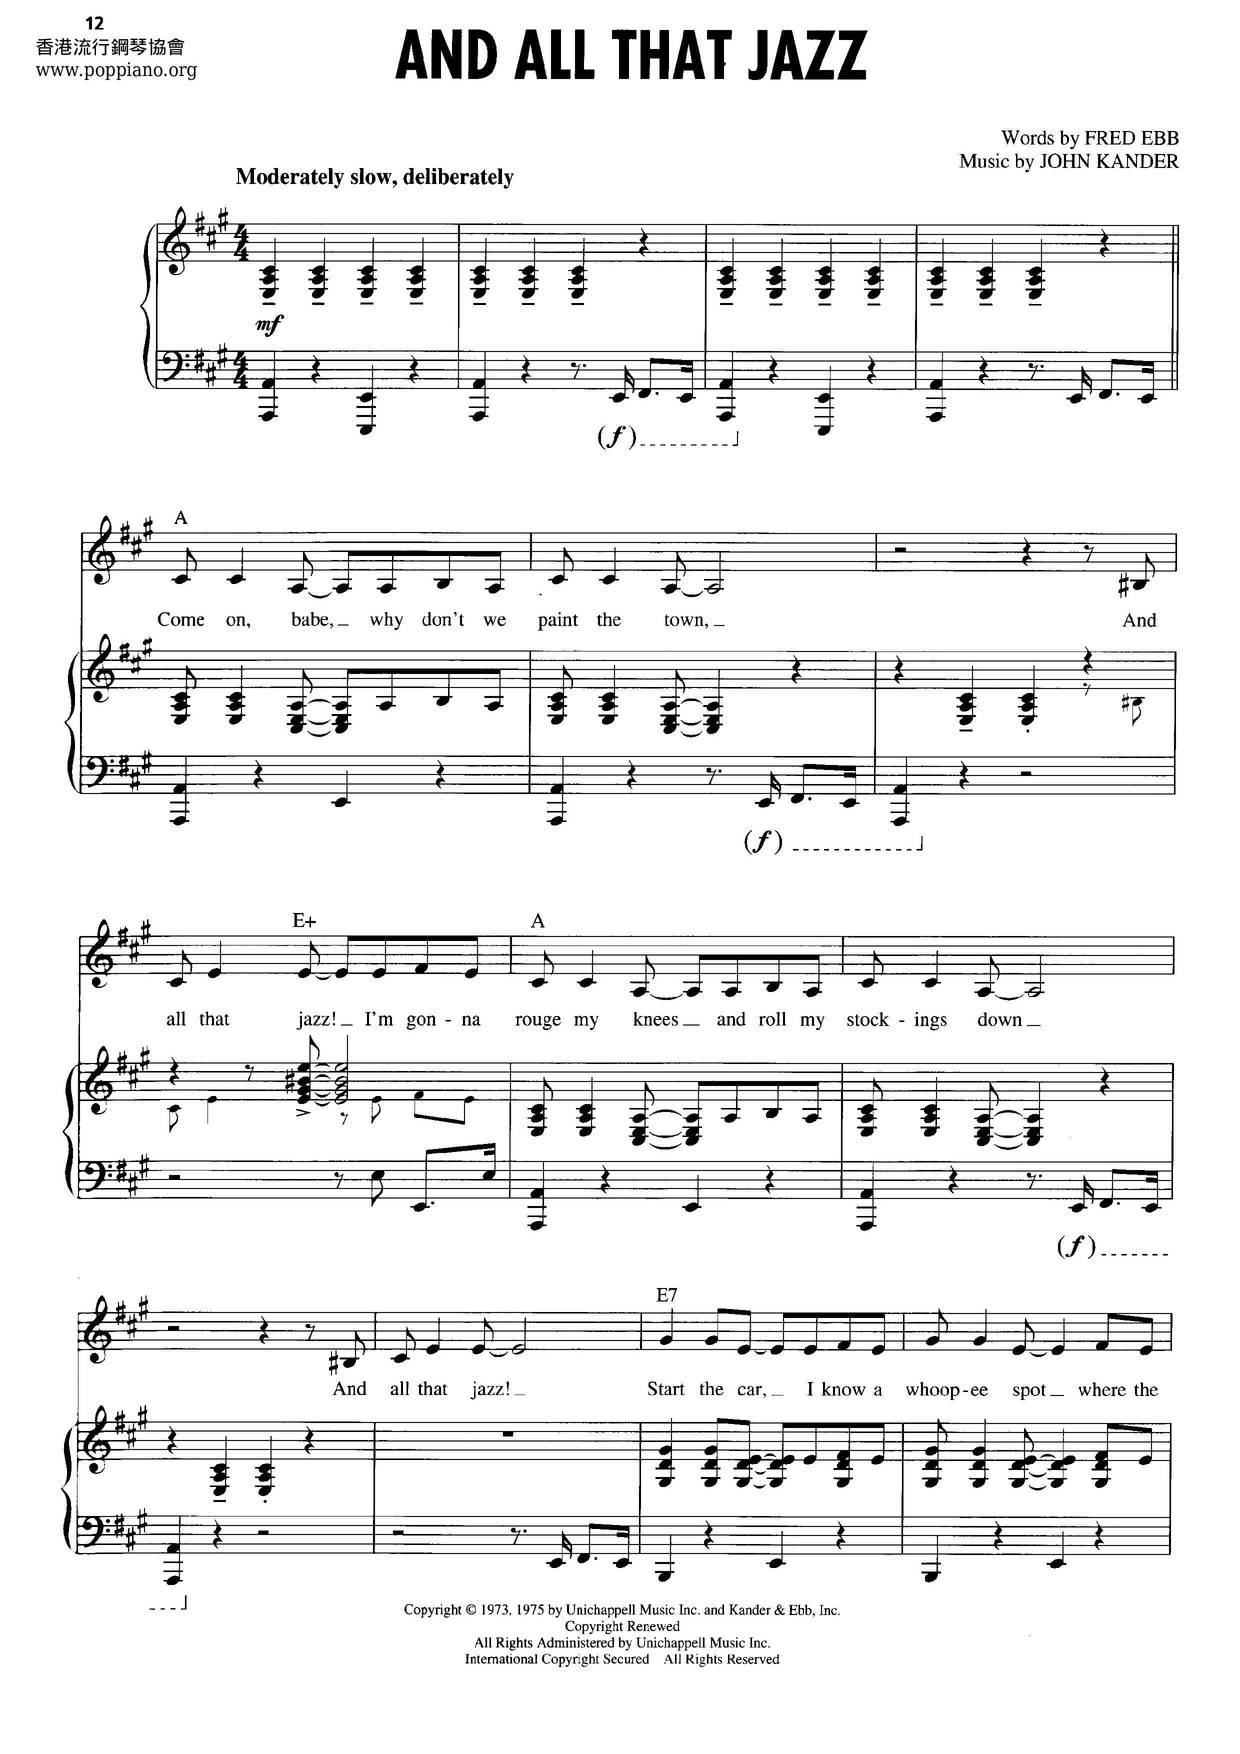 Chicago Songbook 85 Pages琴谱